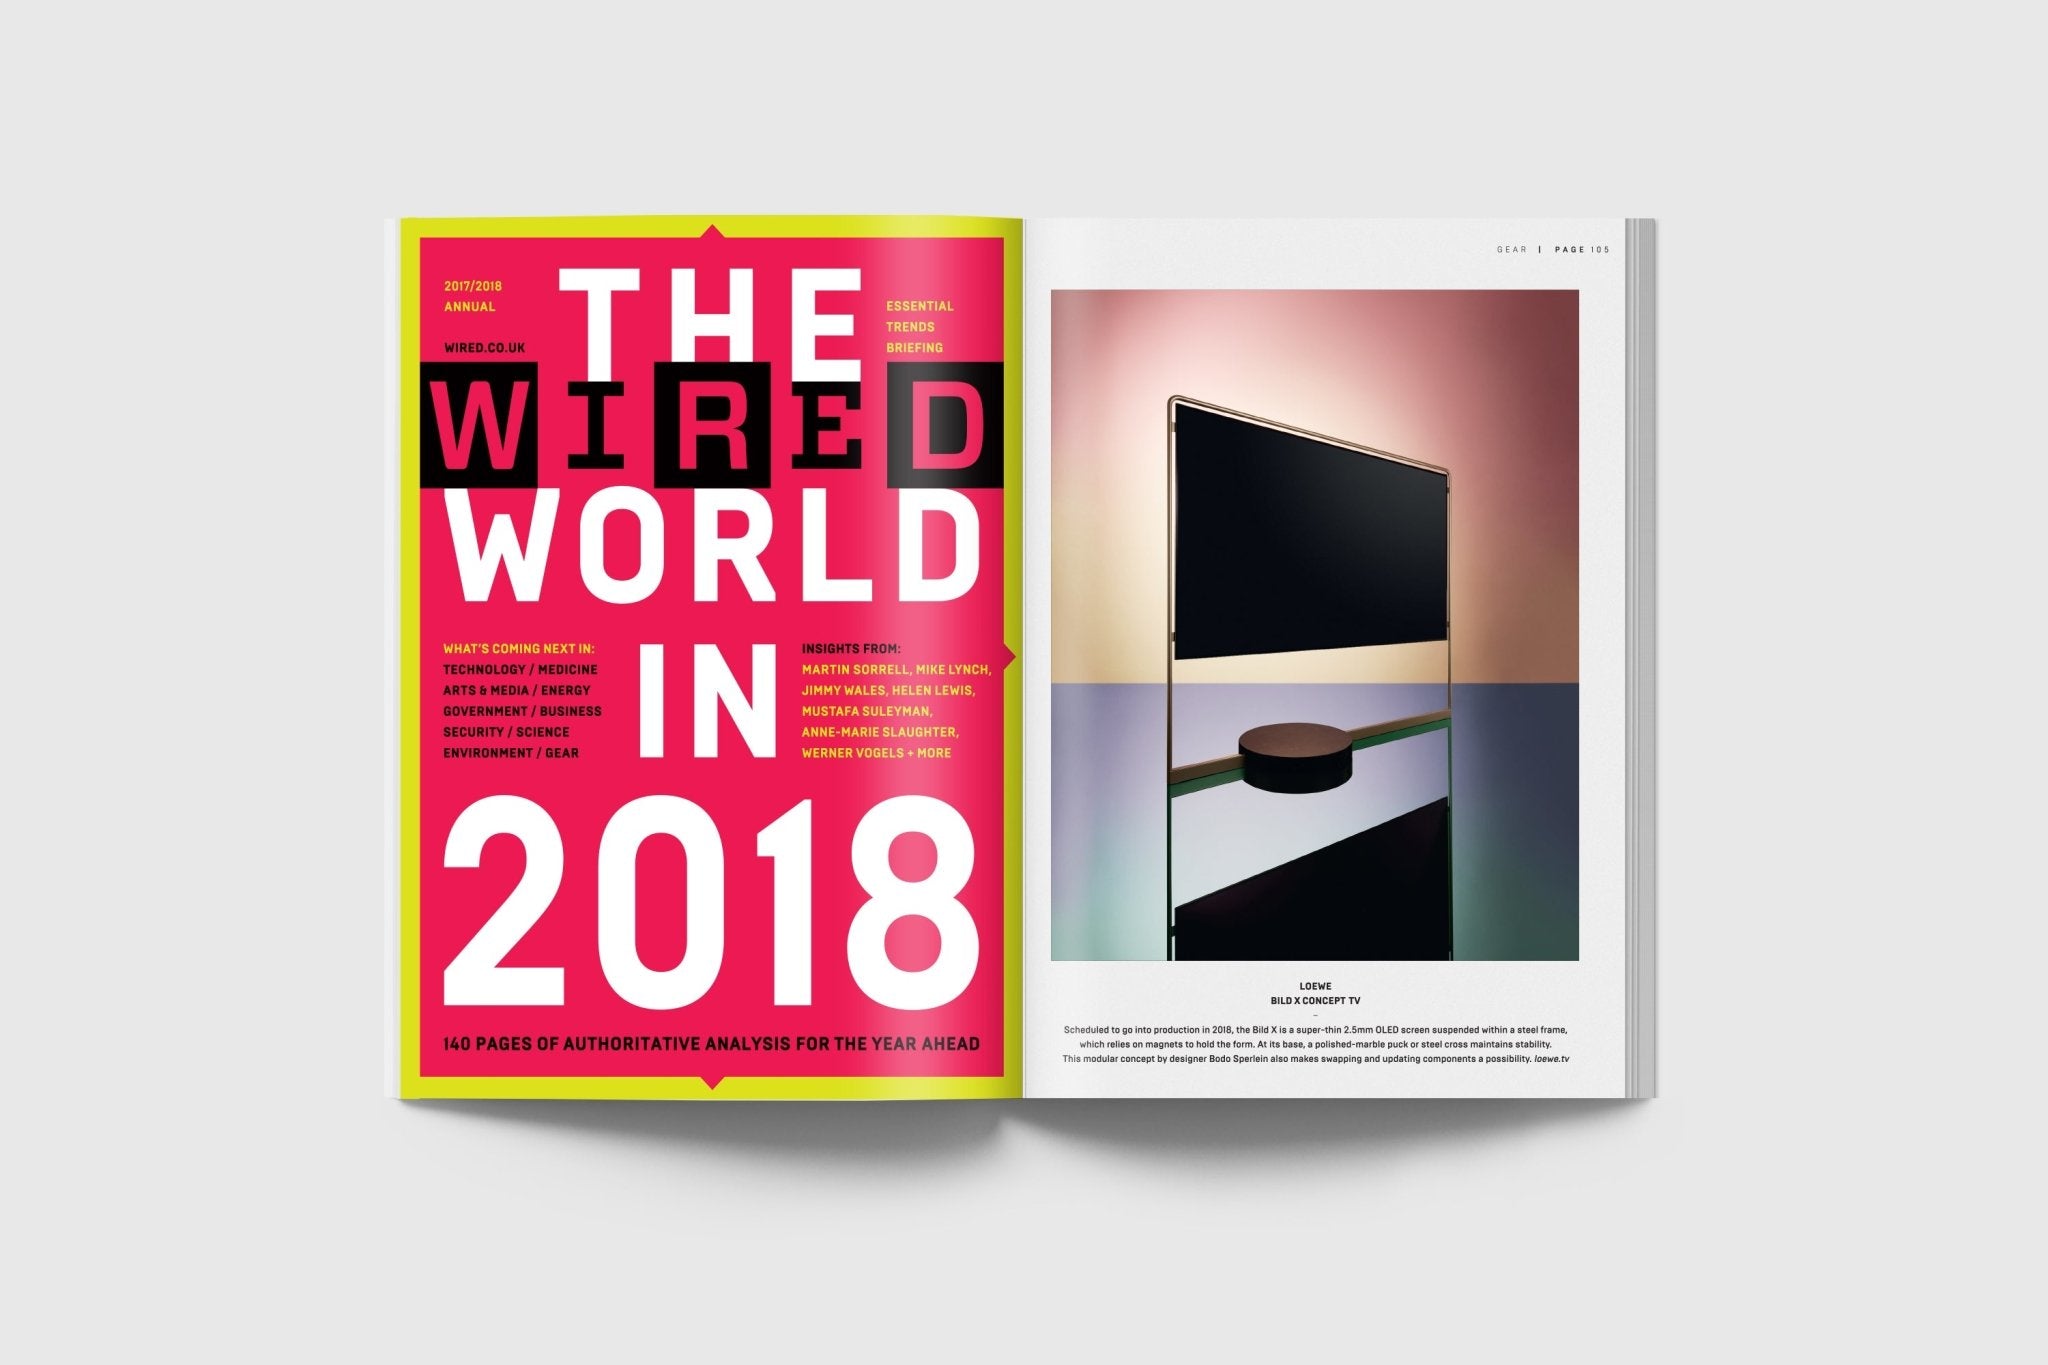 The World of Wired